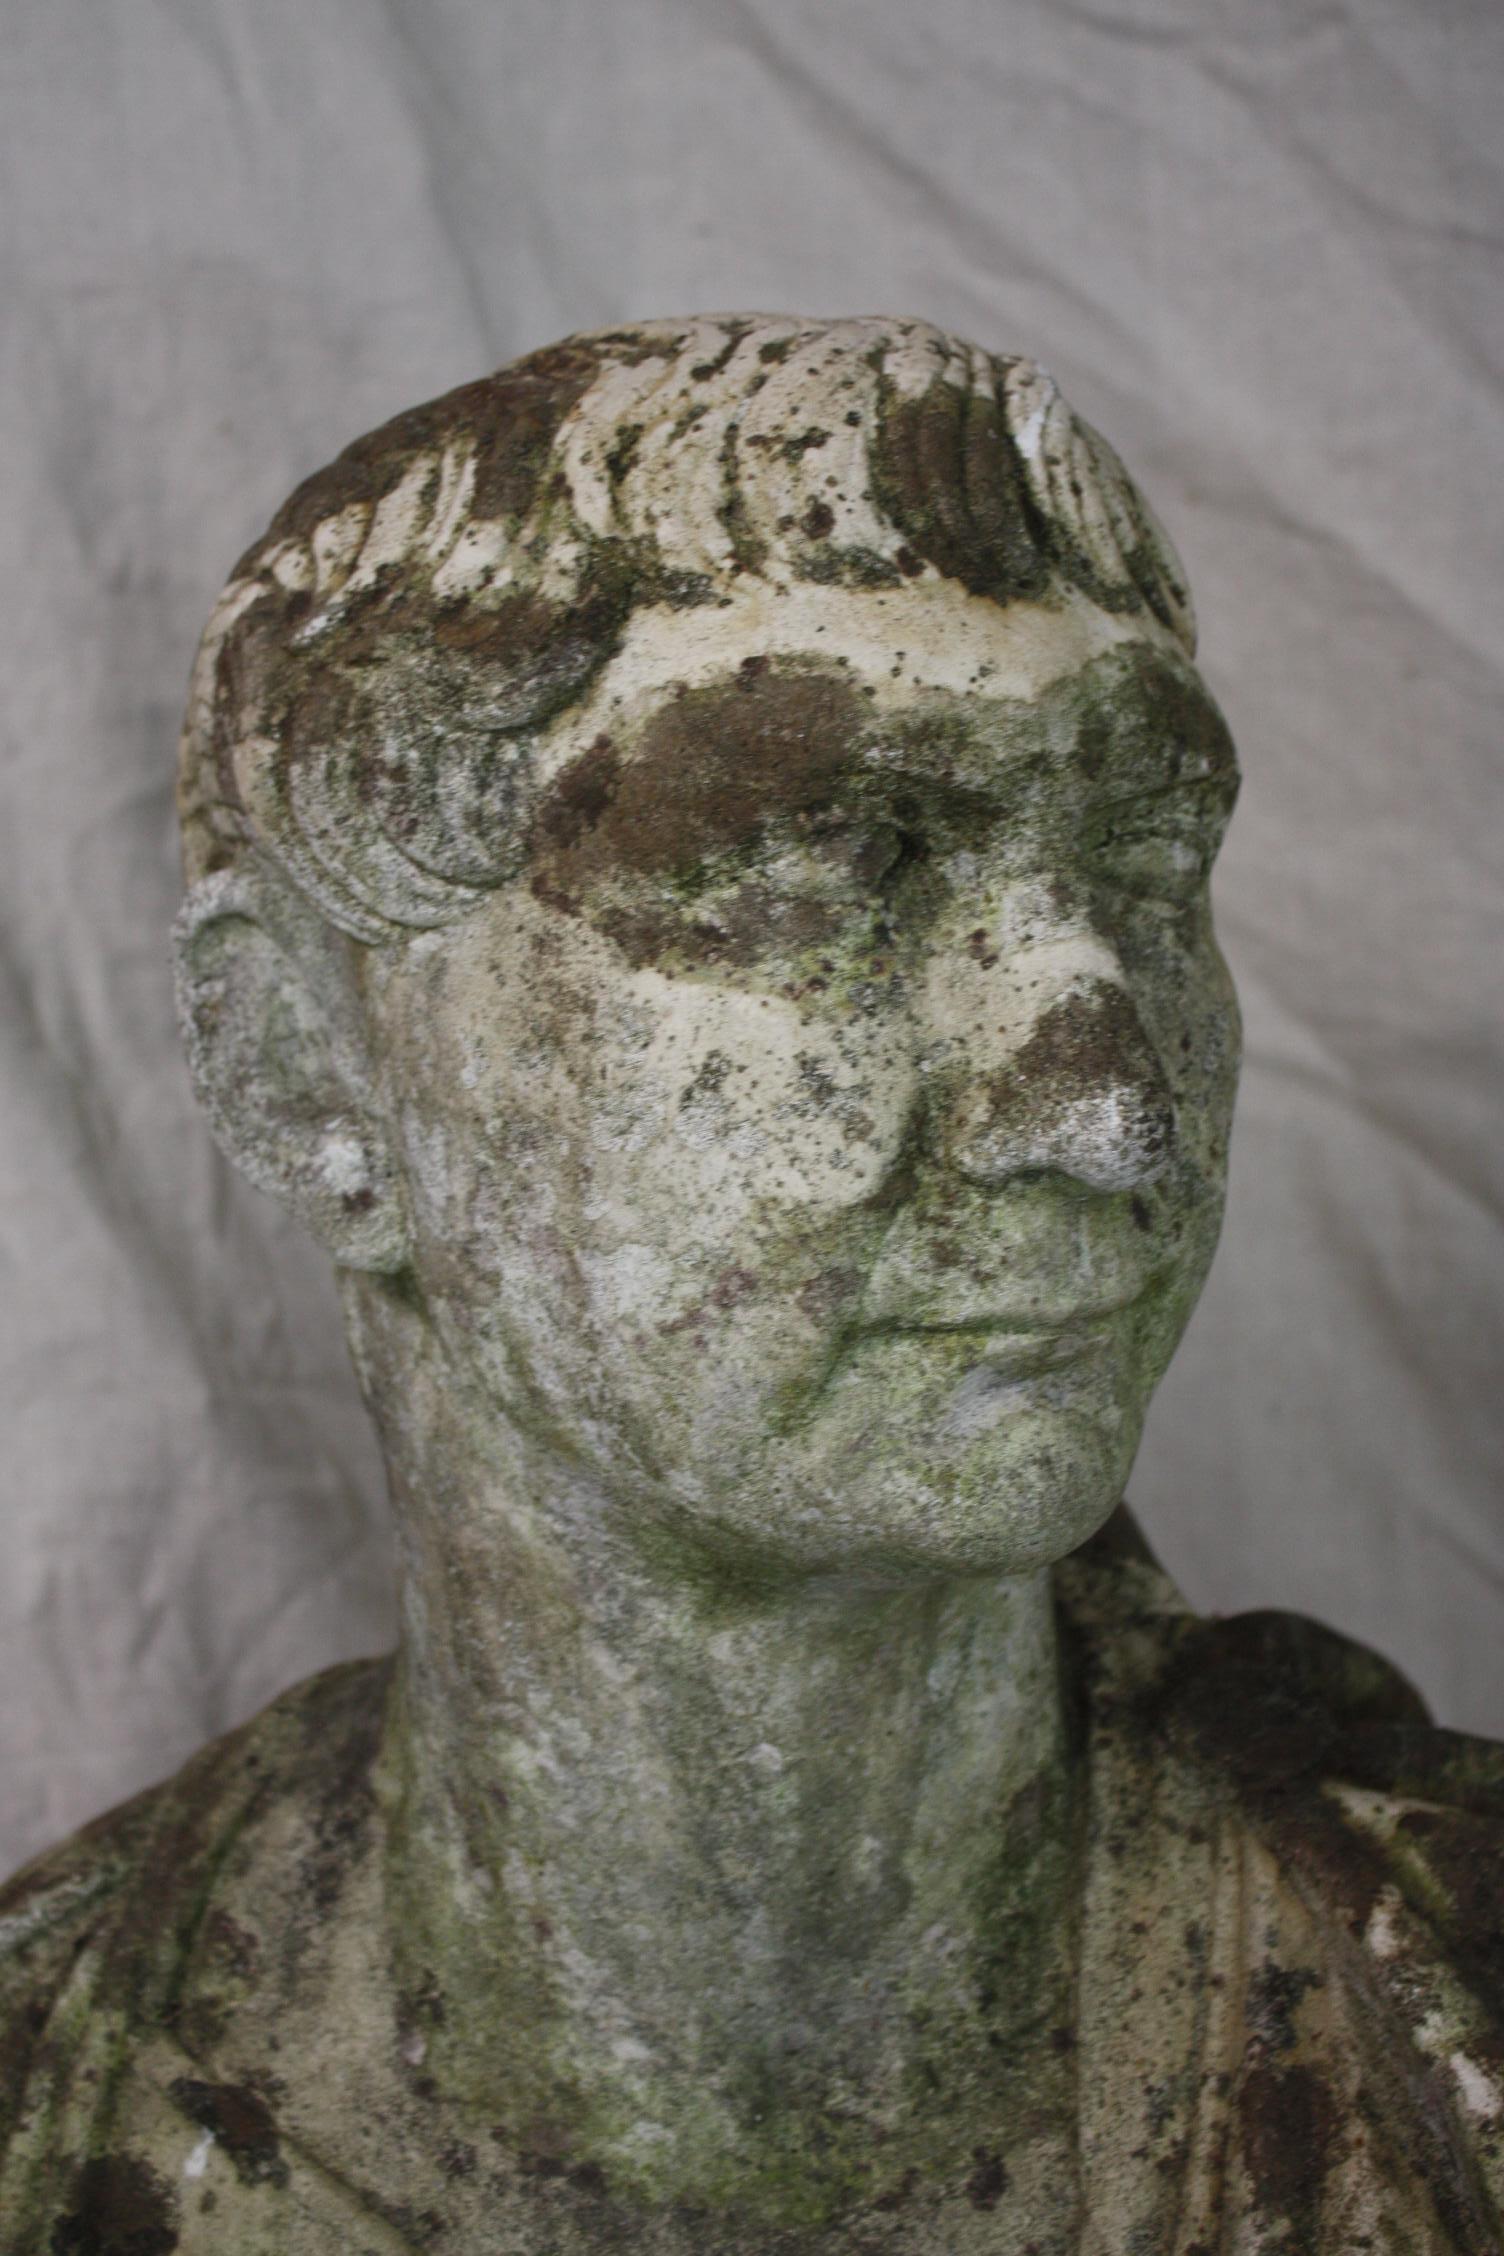 This is a great looking French bust that dates to the early 1900s. It is made of reconstituted stone. It has a very nice patina with moss and lichen growth. It is very decorative. It can be used inside or out.